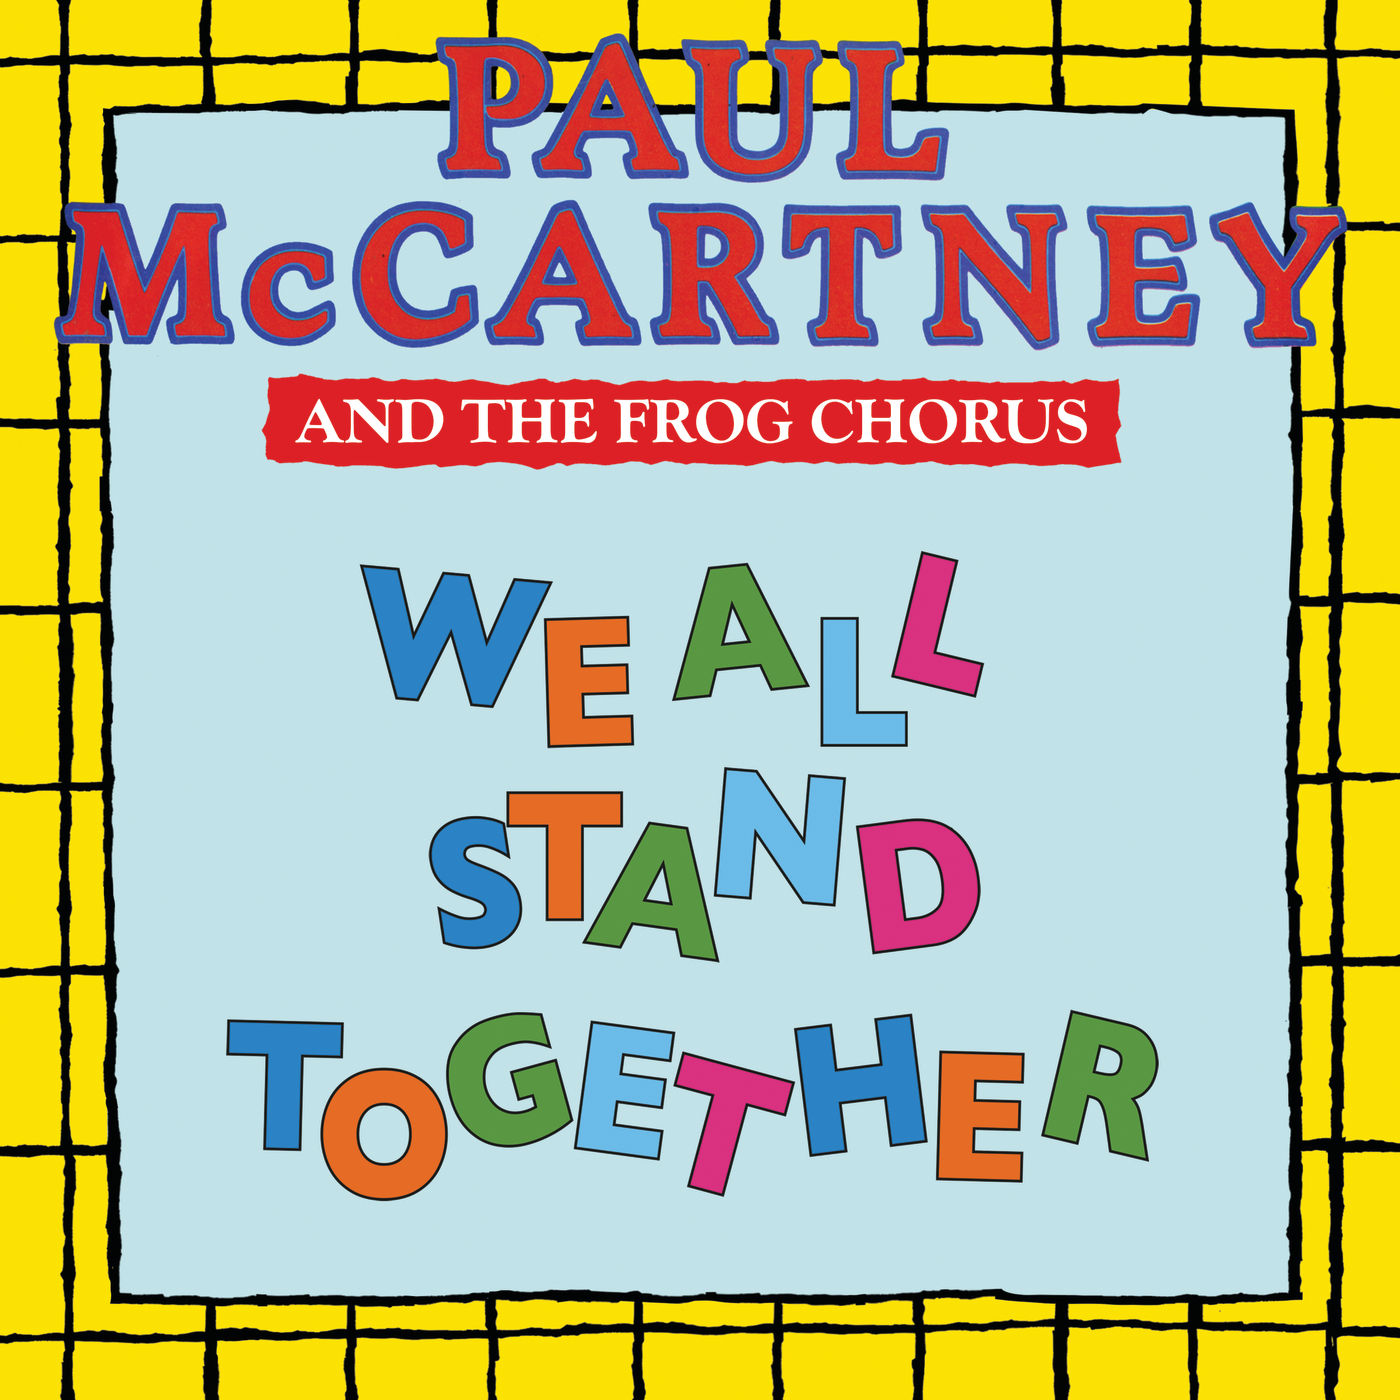 Paul McCartney - We All Stand Together (1984/2021) [FLAC 24bit/96kHz]